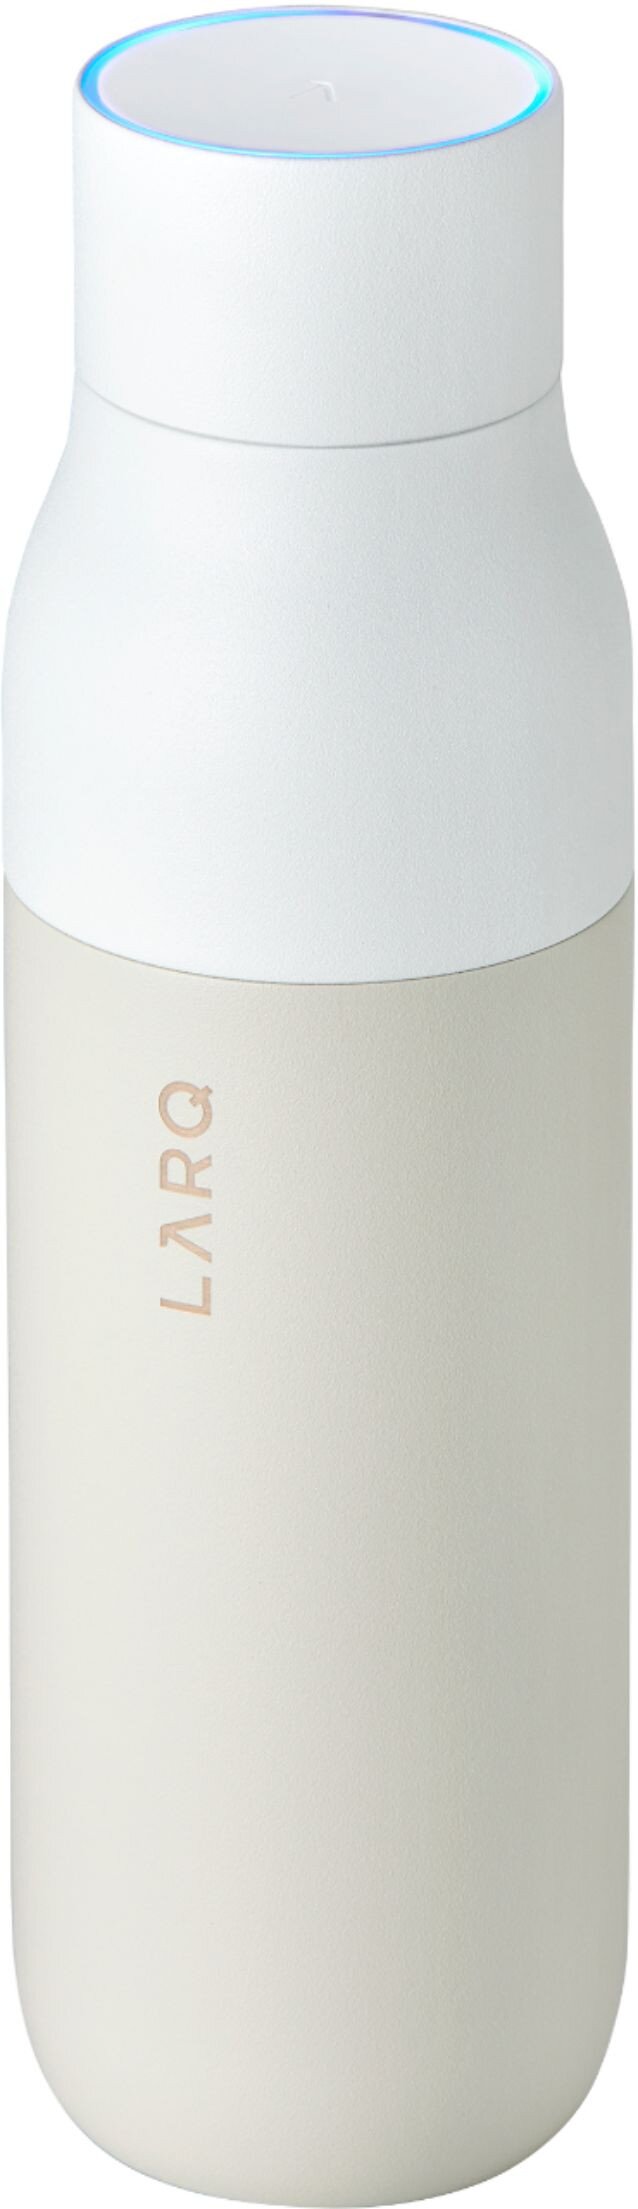 Larq Self Cleaning Water Bottle Himalayan Pink 17oz for sale online